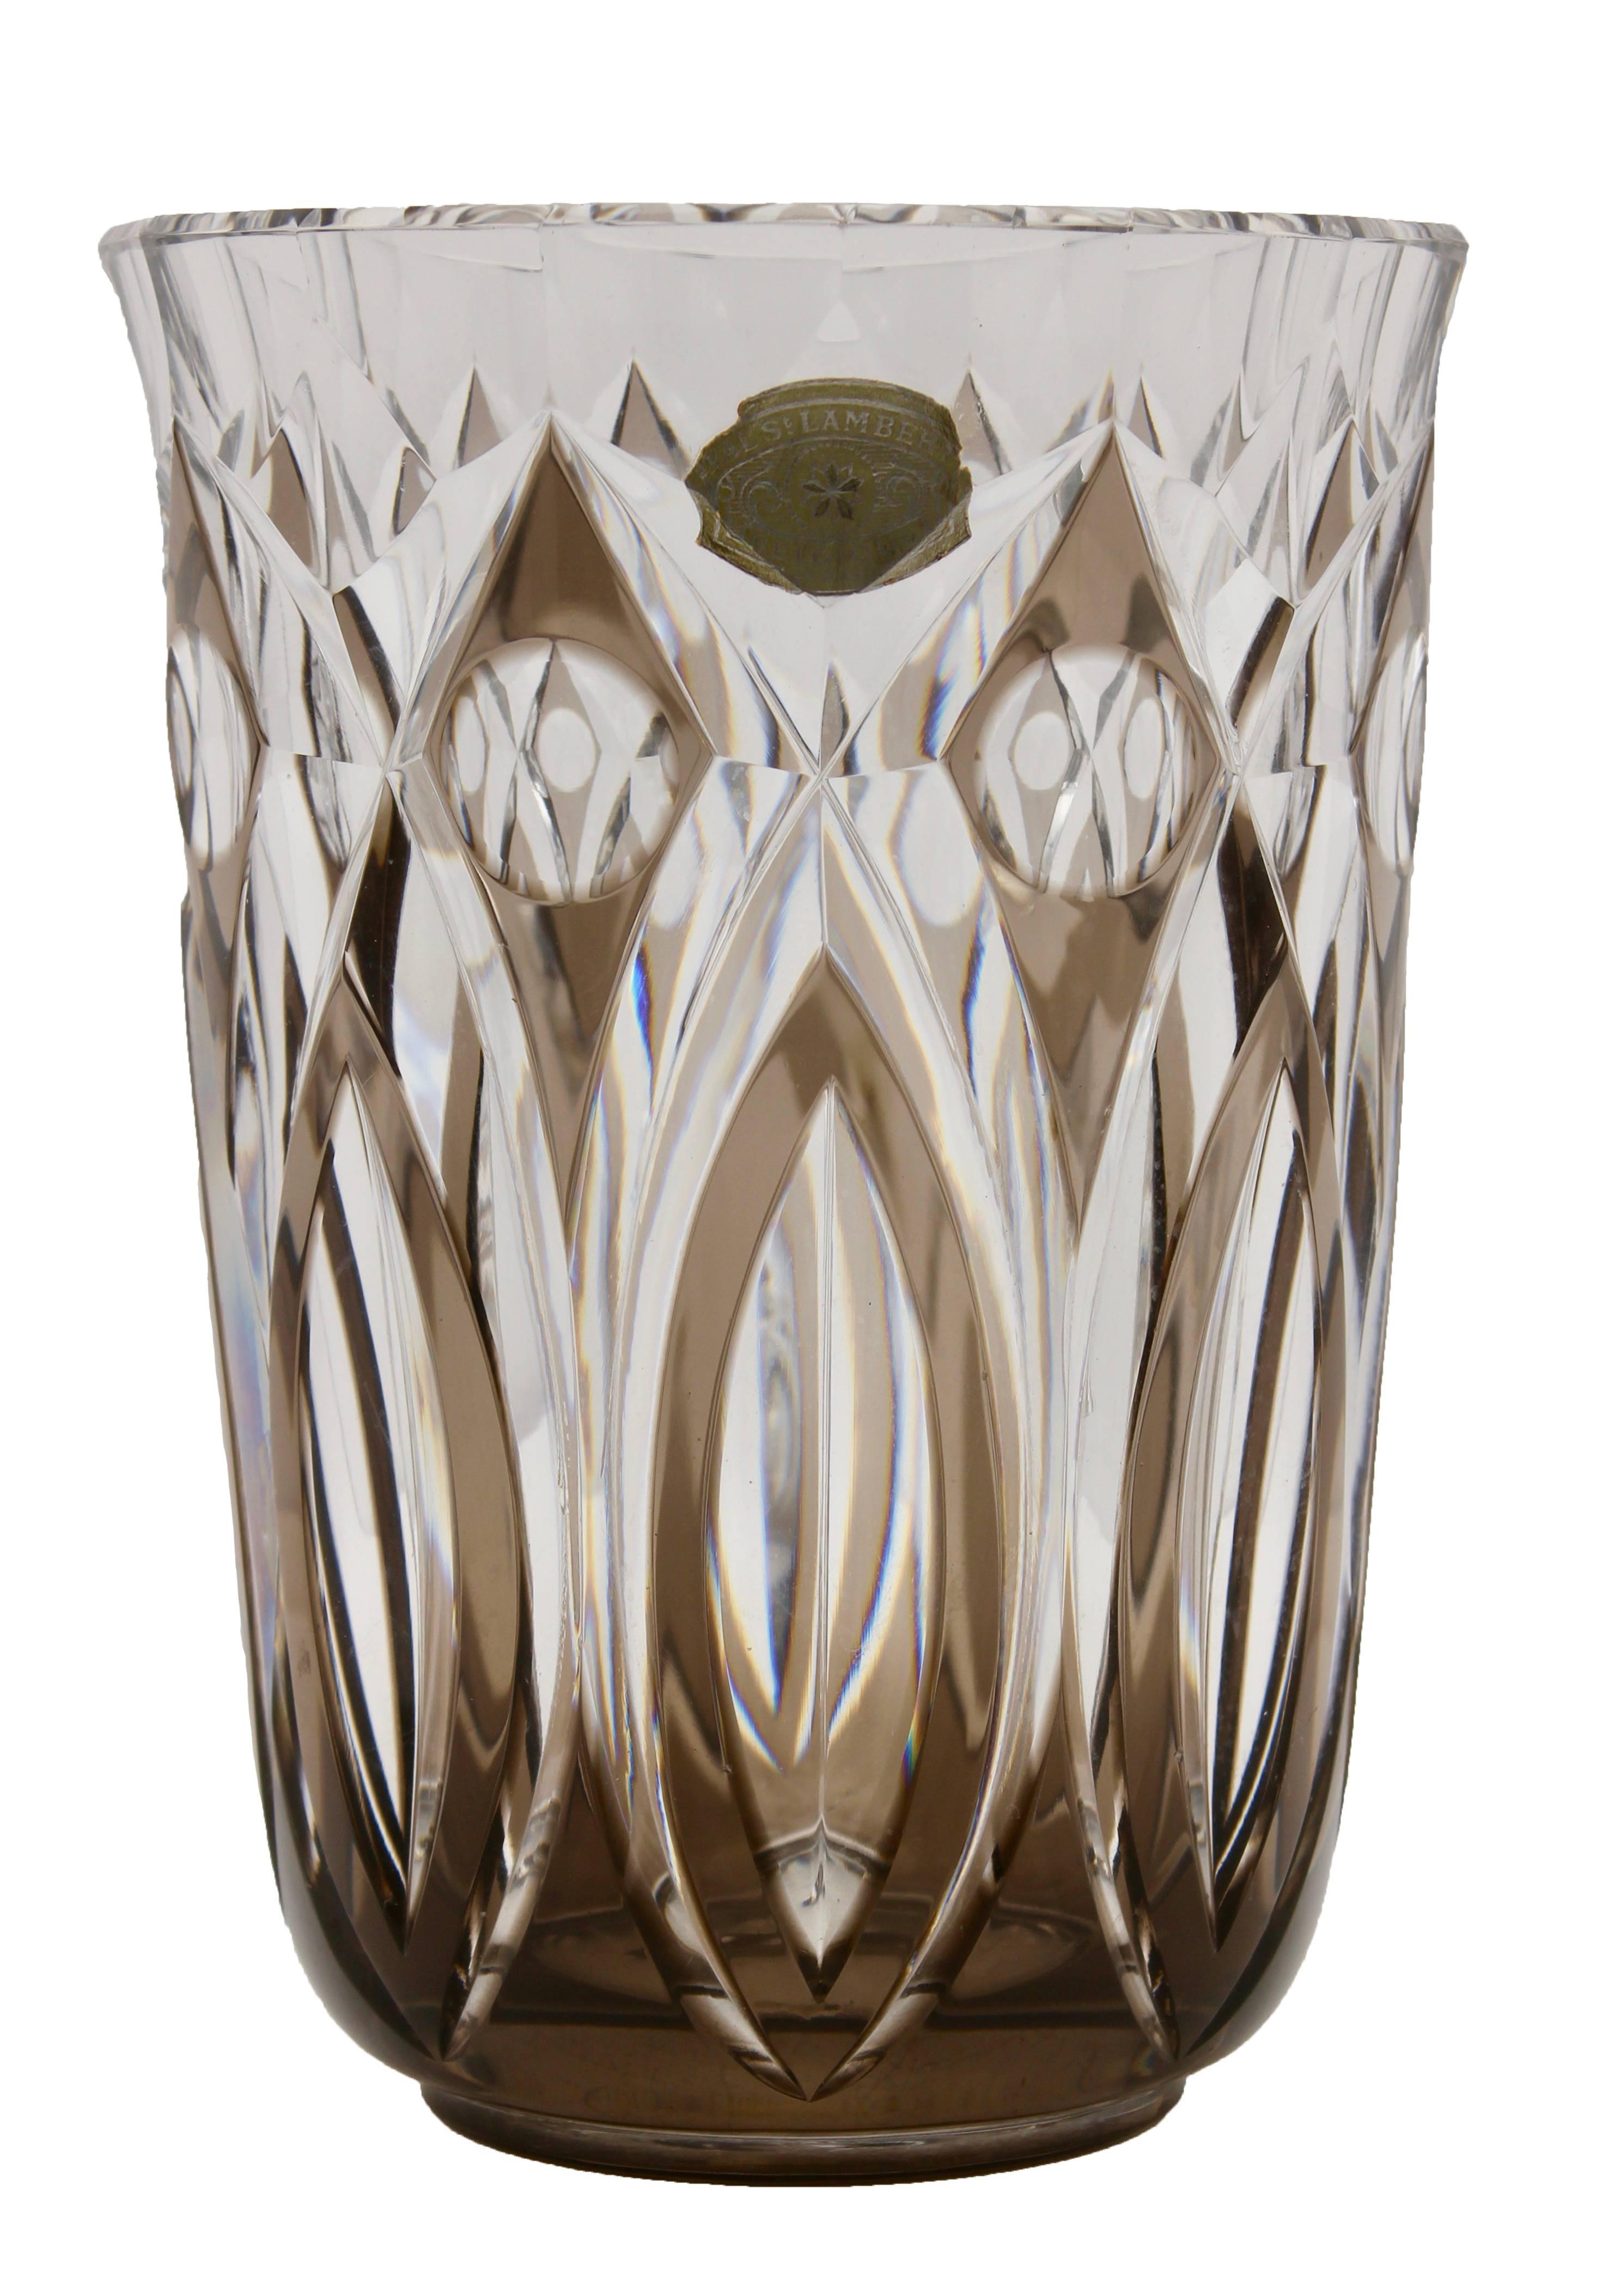 Val Saint Lambert vase Charles Graffart, catalogue, 1950s
Retains a factory label. 

Beautiful signed Val Saint Lambert circular crystal vase, handcut-to-clear, the glass is thick, deeply and evenly cut,
Val Saint Lambert, circa 1950s,
Origin: